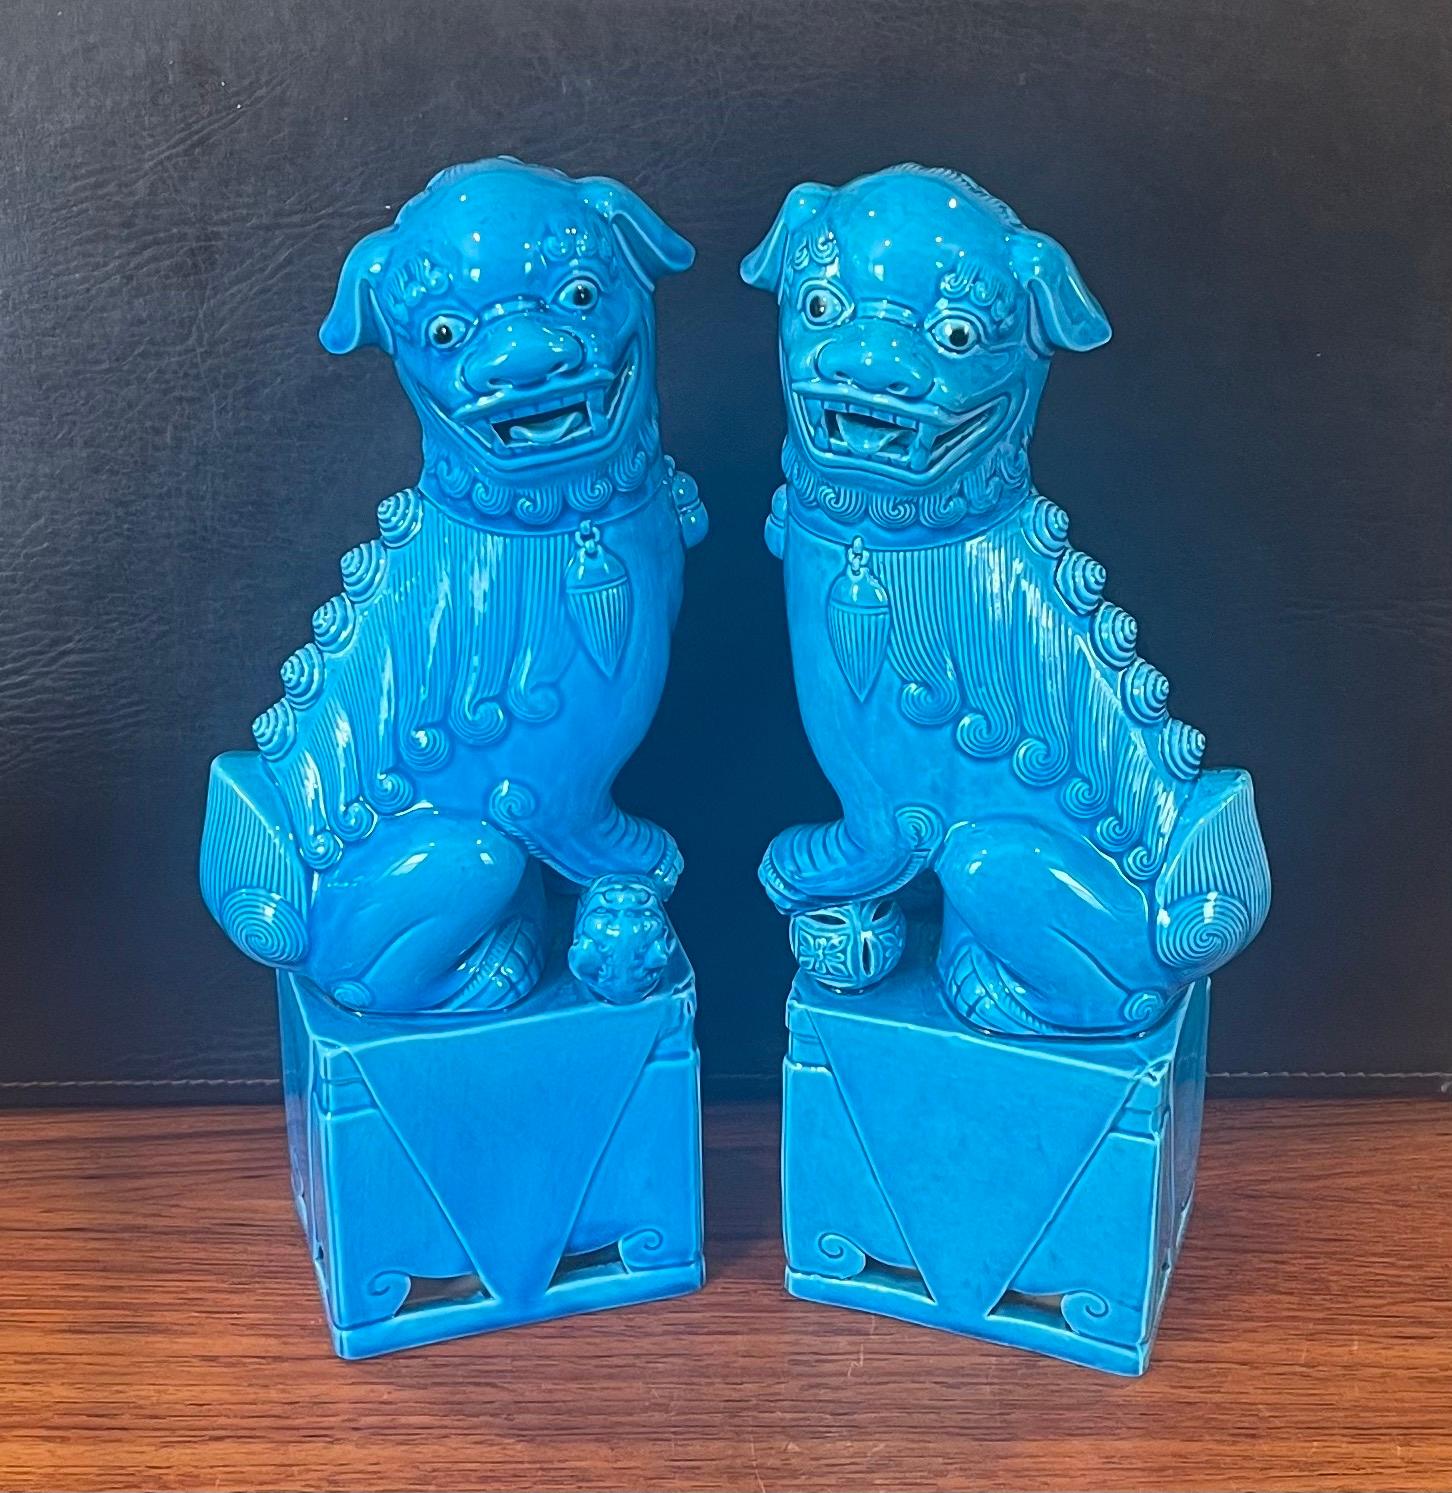 Excellent pair of massive mid-century turquoise blue ceramic foo dog sculptures, circa 1960s. These symbolic guardians present a beautiful turquoise hue and are in very good vintage condition with no chips or cracks. The dogs measure 12